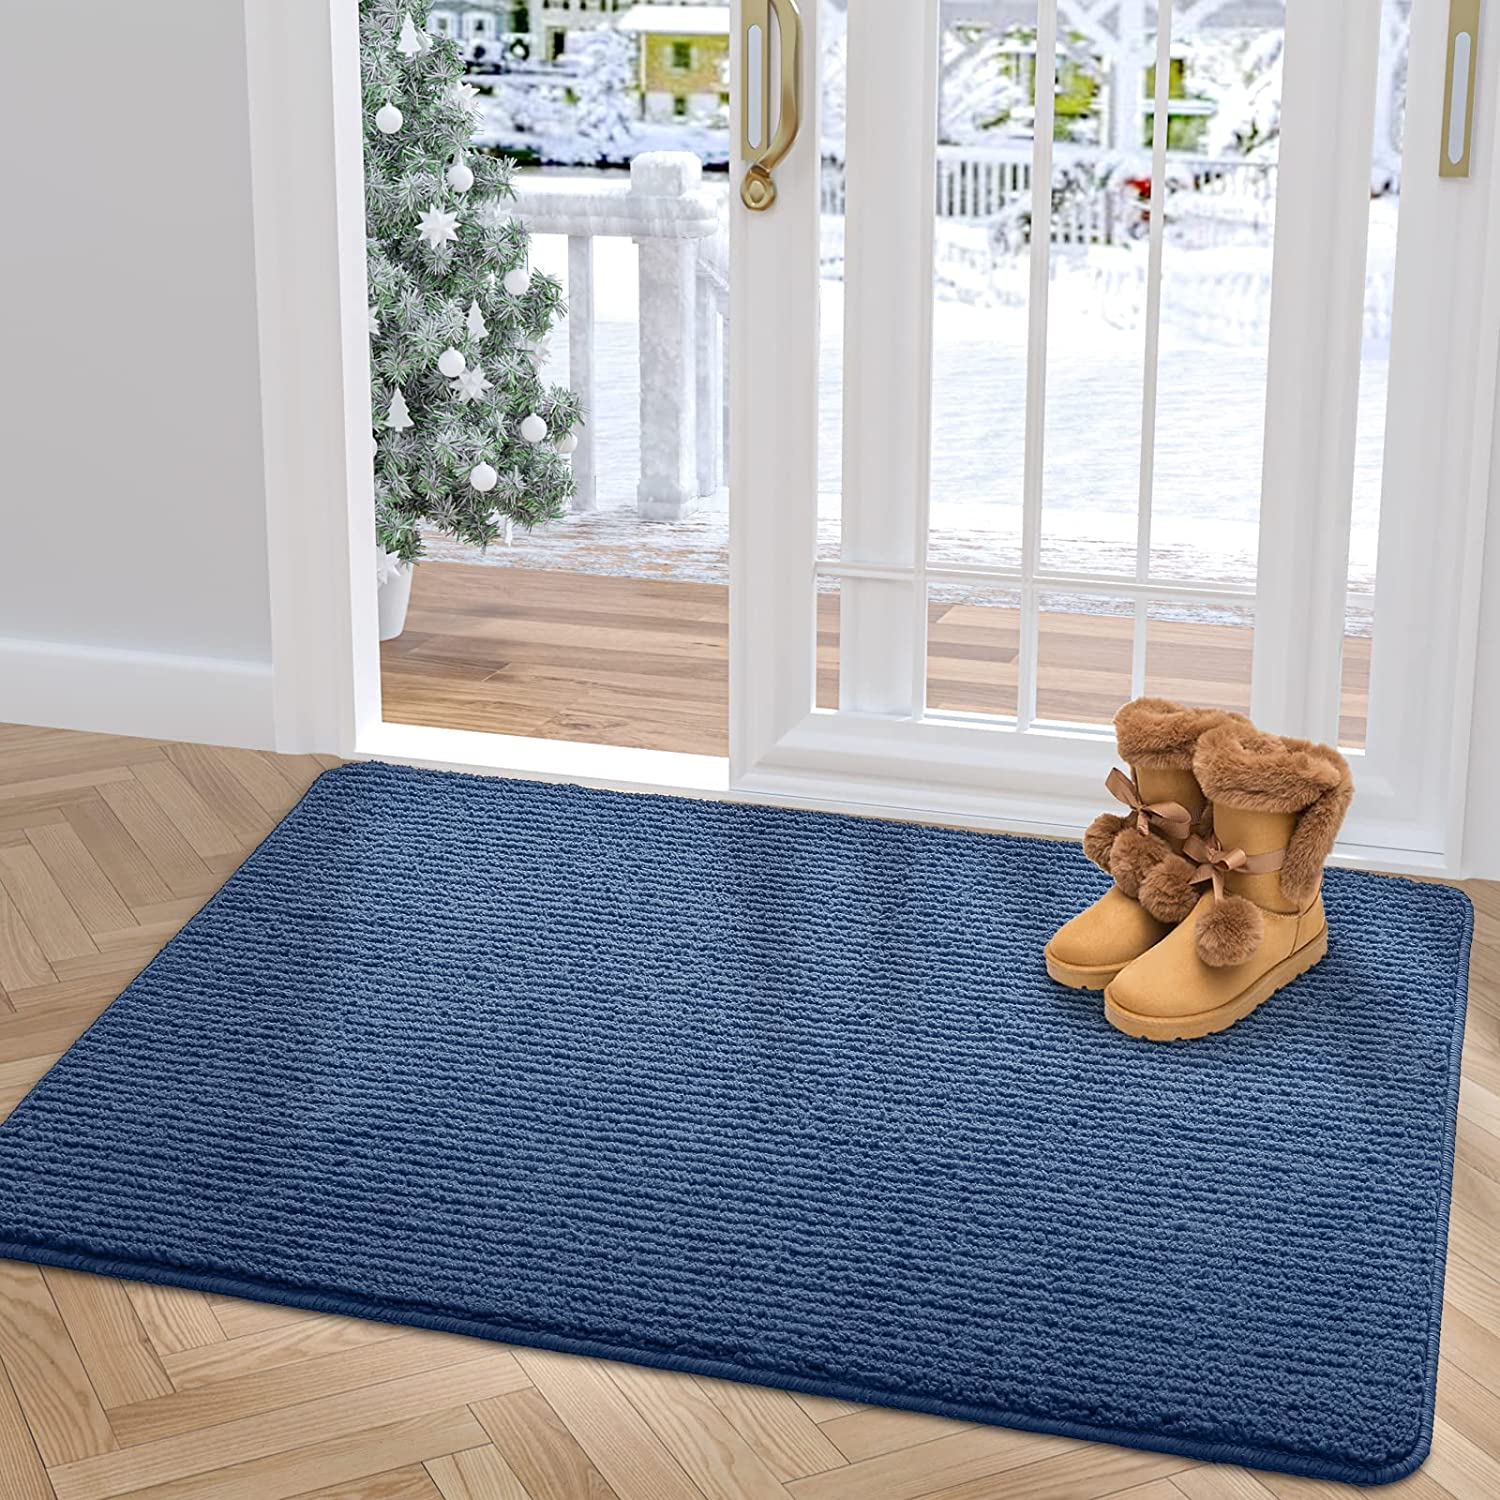 Best Doormats for Winter Boots The Real Deal by RetailMeNot